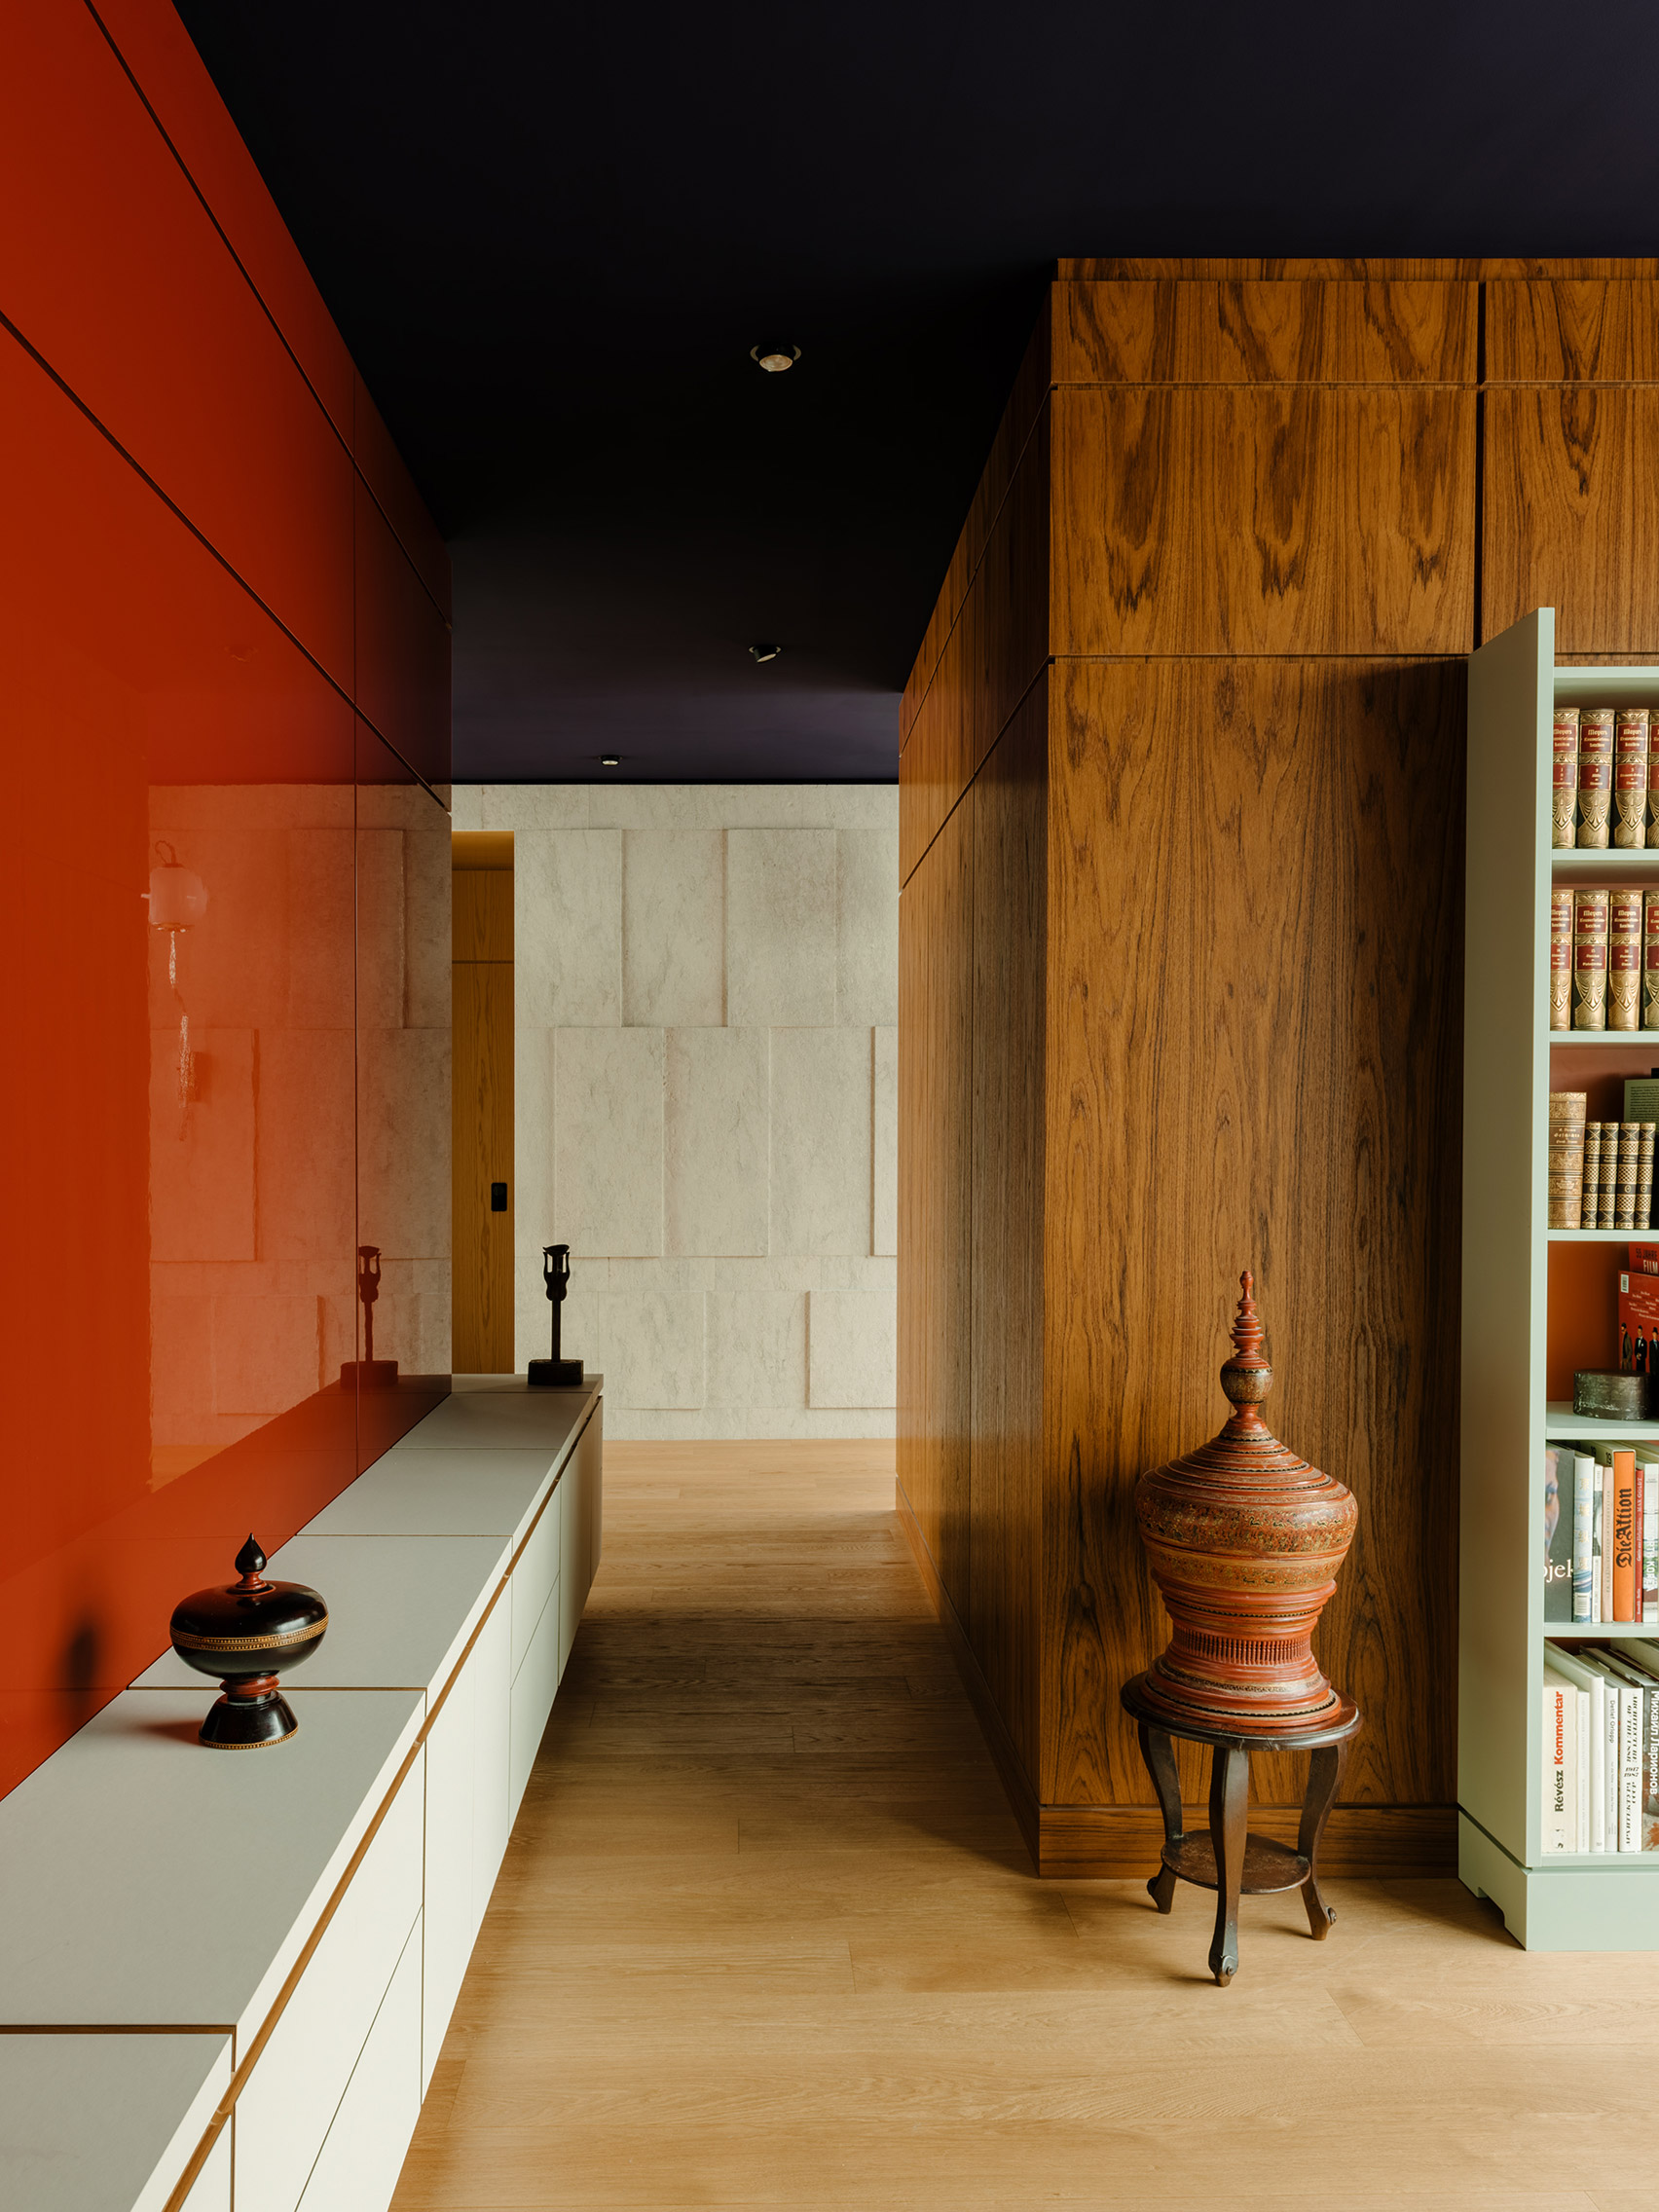 Walls clad in teak, red-lacquered wood and limestone in interior of Berlin apartment The Village designed by Gisbert Pöppler